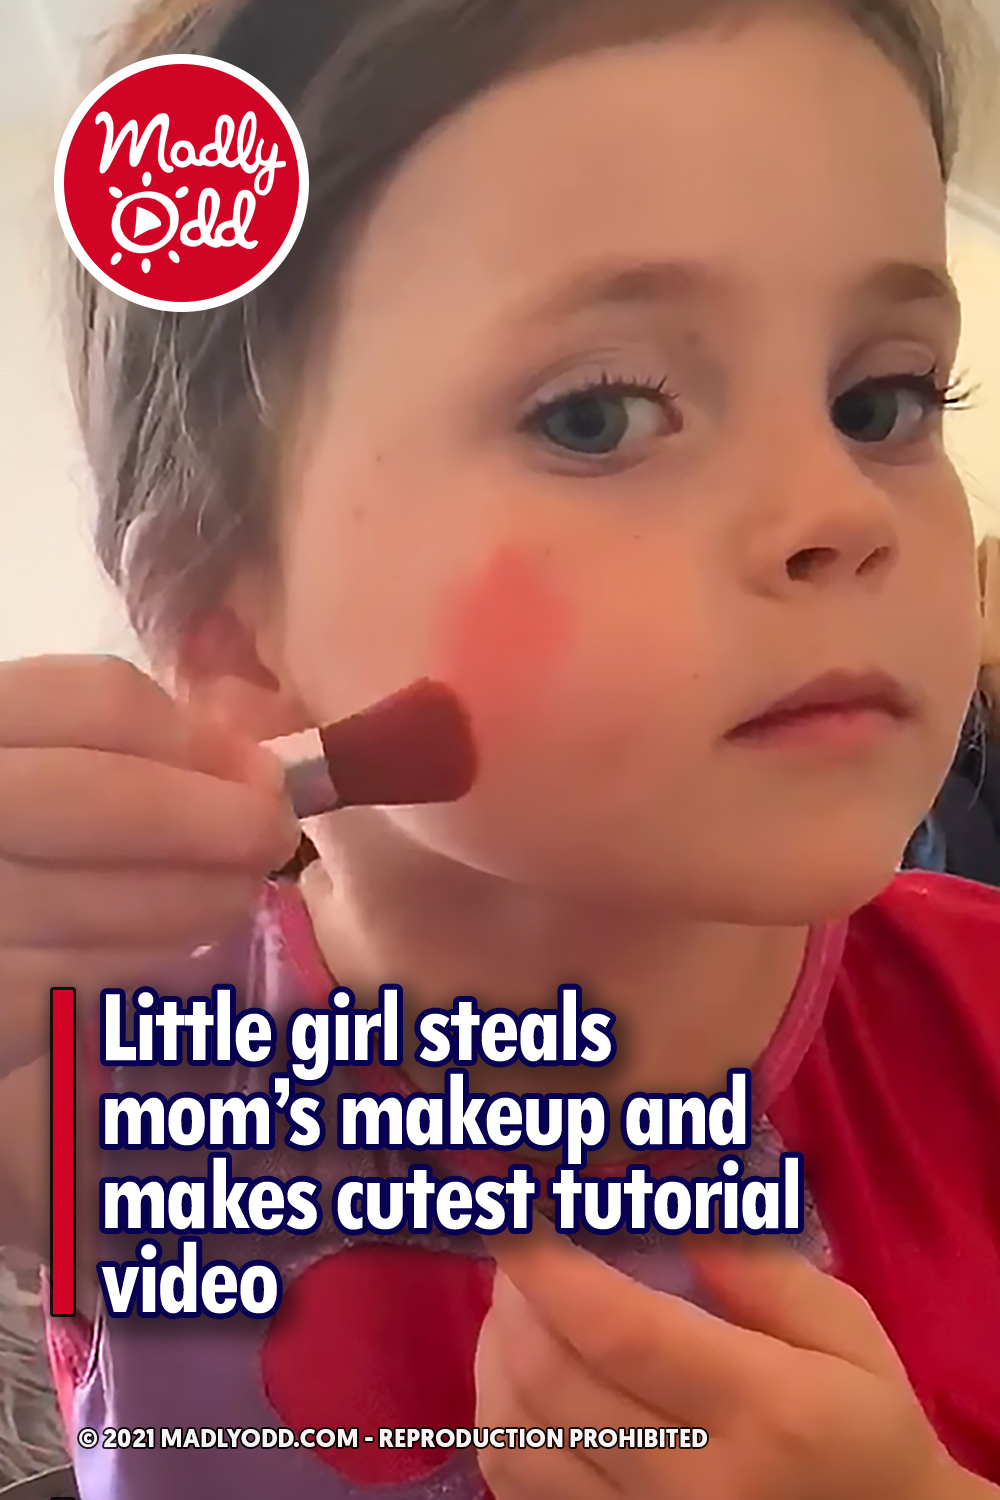 Little girl steals mom’s makeup and makes cutest tutorial video